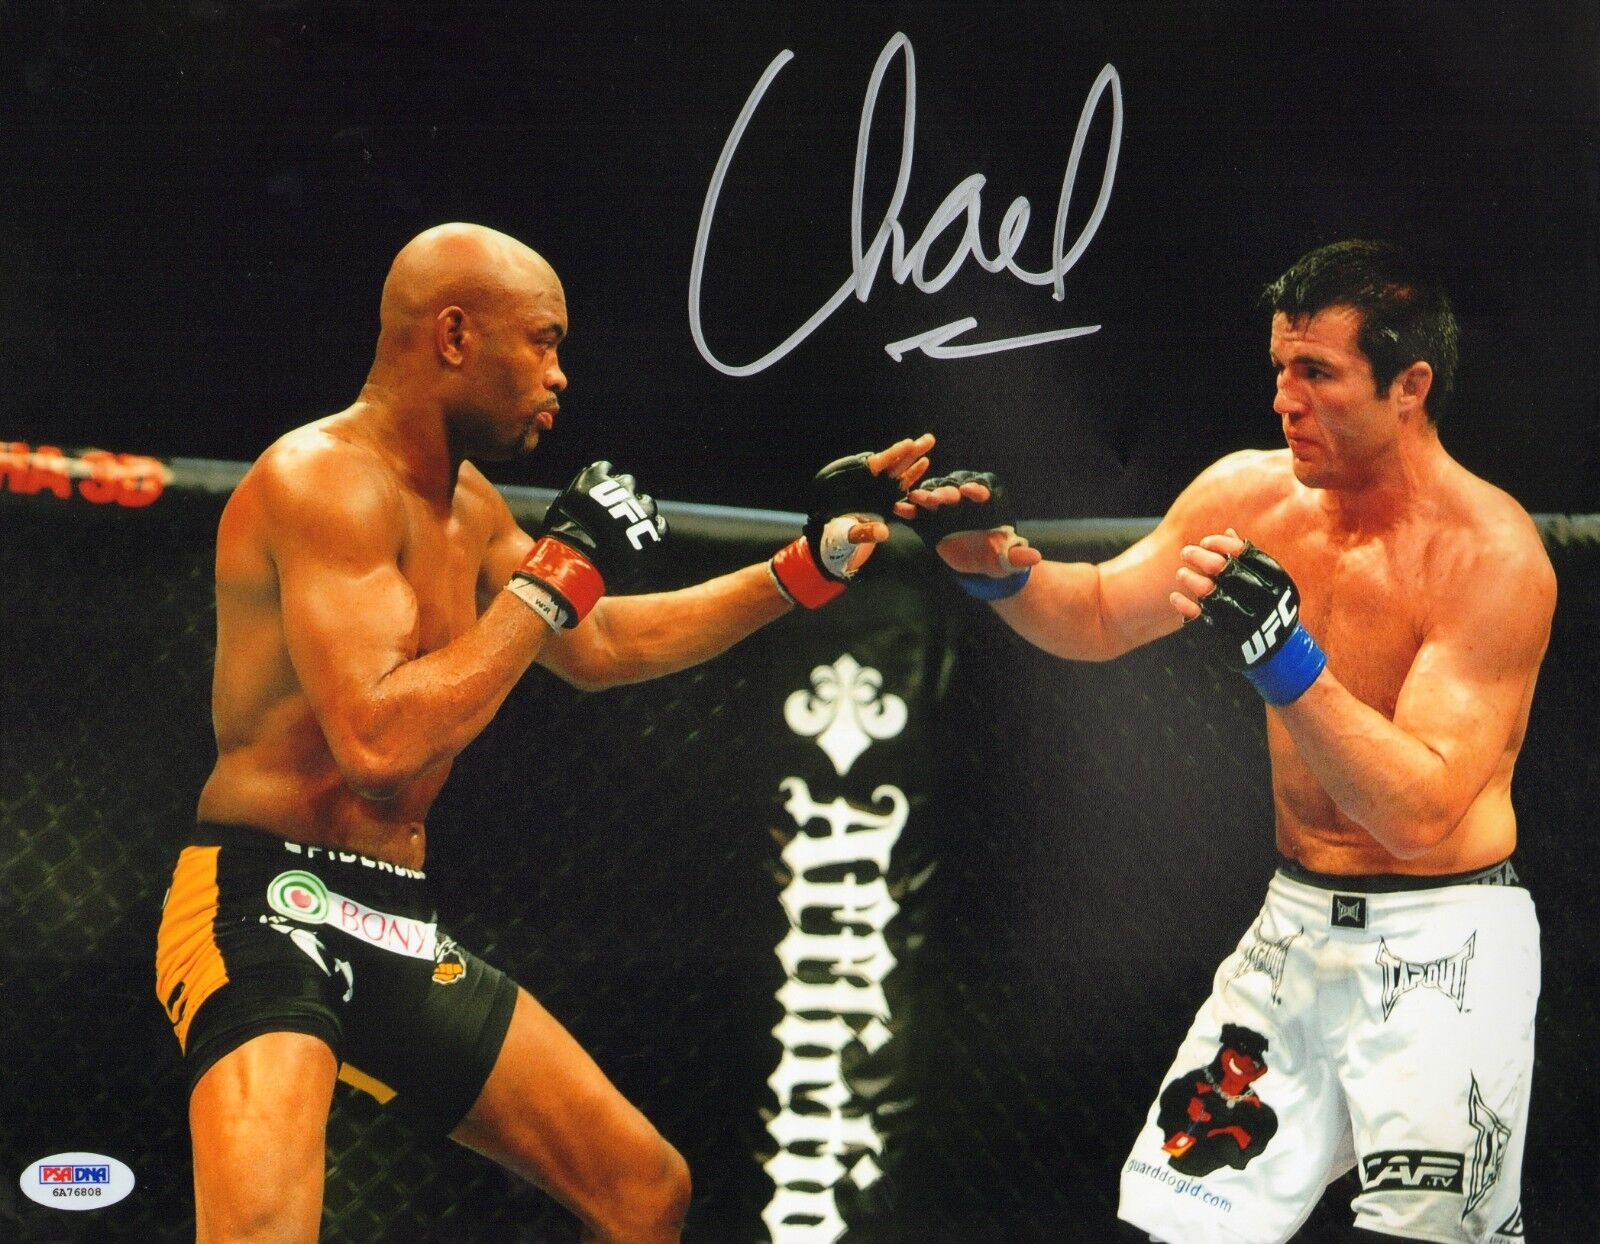 Chael Sonnen Signed UFC 11x14 Photo Poster painting PSA/DNA COA 117 148 Picture Anderson Silva 5